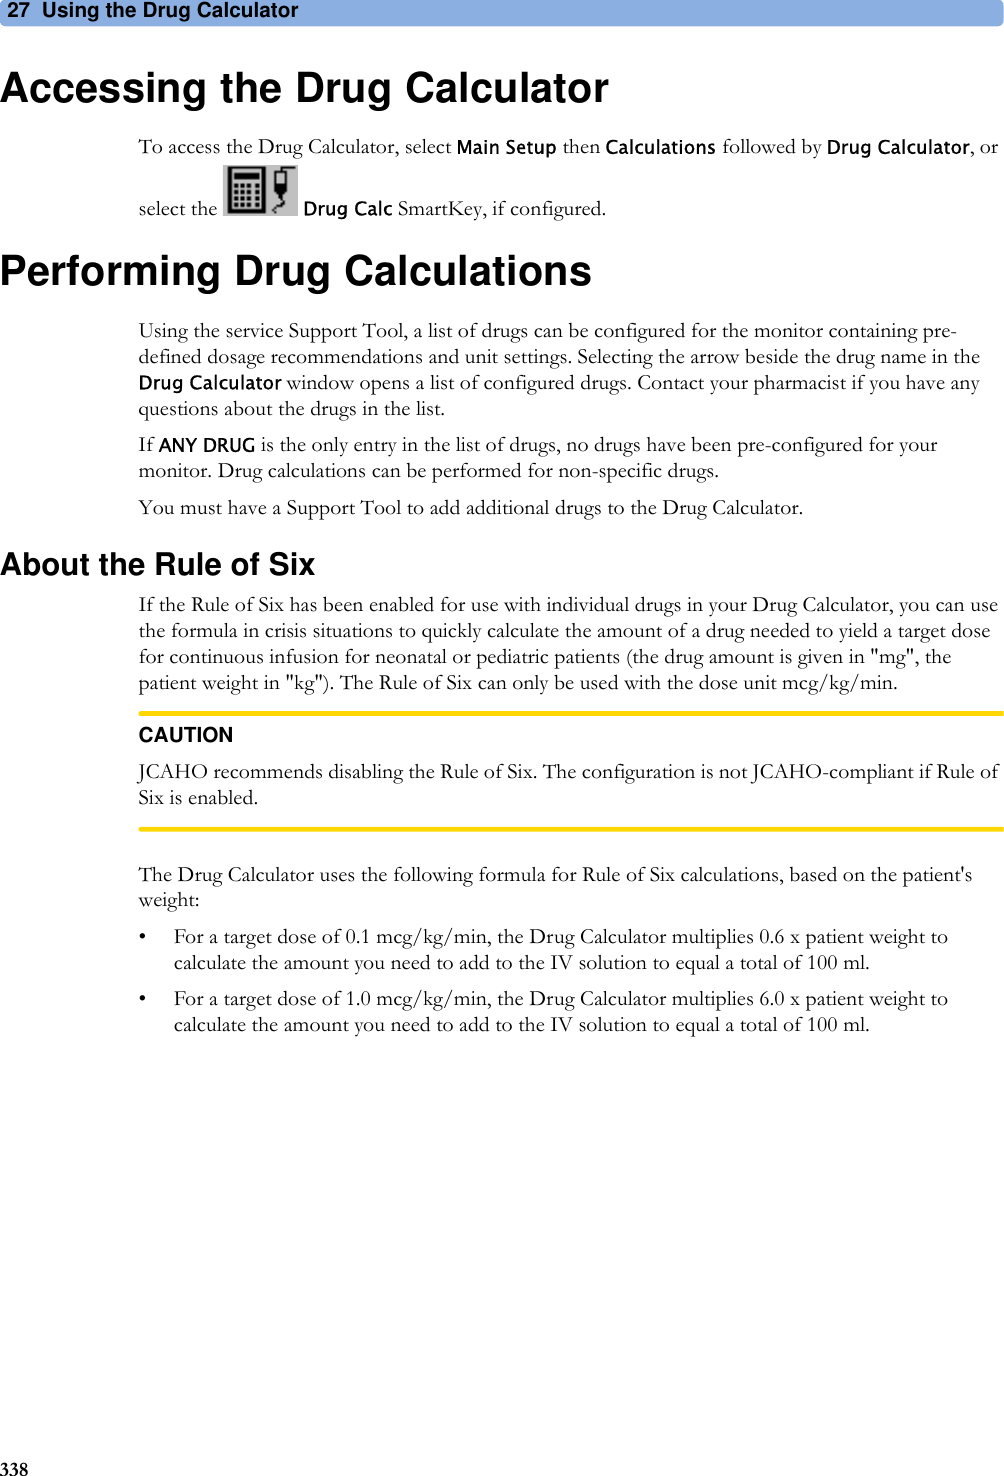 27 Using the Drug Calculator338Accessing the Drug CalculatorTo access the Drug Calculator, select Main Setup then Calculations followed by Drug Calculator, or select the  Drug Calc SmartKey, if configured.Performing Drug CalculationsUsing the service Support Tool, a list of drugs can be configured for the monitor containing pre-defined dosage recommendations and unit settings. Selecting the arrow beside the drug name in the Drug Calculator window opens a list of configured drugs. Contact your pharmacist if you have any questions about the drugs in the list.If ANY DRUG is the only entry in the list of drugs, no drugs have been pre-configured for your monitor. Drug calculations can be performed for non-specific drugs.You must have a Support Tool to add additional drugs to the Drug Calculator.About the Rule of SixIf the Rule of Six has been enabled for use with individual drugs in your Drug Calculator, you can use the formula in crisis situations to quickly calculate the amount of a drug needed to yield a target dose for continuous infusion for neonatal or pediatric patients (the drug amount is given in &quot;mg&quot;, the patient weight in &quot;kg&quot;). The Rule of Six can only be used with the dose unit mcg/kg/min.CAUTIONJCAHO recommends disabling the Rule of Six. The configuration is not JCAHO-compliant if Rule of Six is enabled.The Drug Calculator uses the following formula for Rule of Six calculations, based on the patient&apos;s weight:• For a target dose of 0.1 mcg/kg/min, the Drug Calculator multiplies 0.6 x patient weight to calculate the amount you need to add to the IV solution to equal a total of 100 ml.• For a target dose of 1.0 mcg/kg/min, the Drug Calculator multiplies 6.0 x patient weight to calculate the amount you need to add to the IV solution to equal a total of 100 ml.